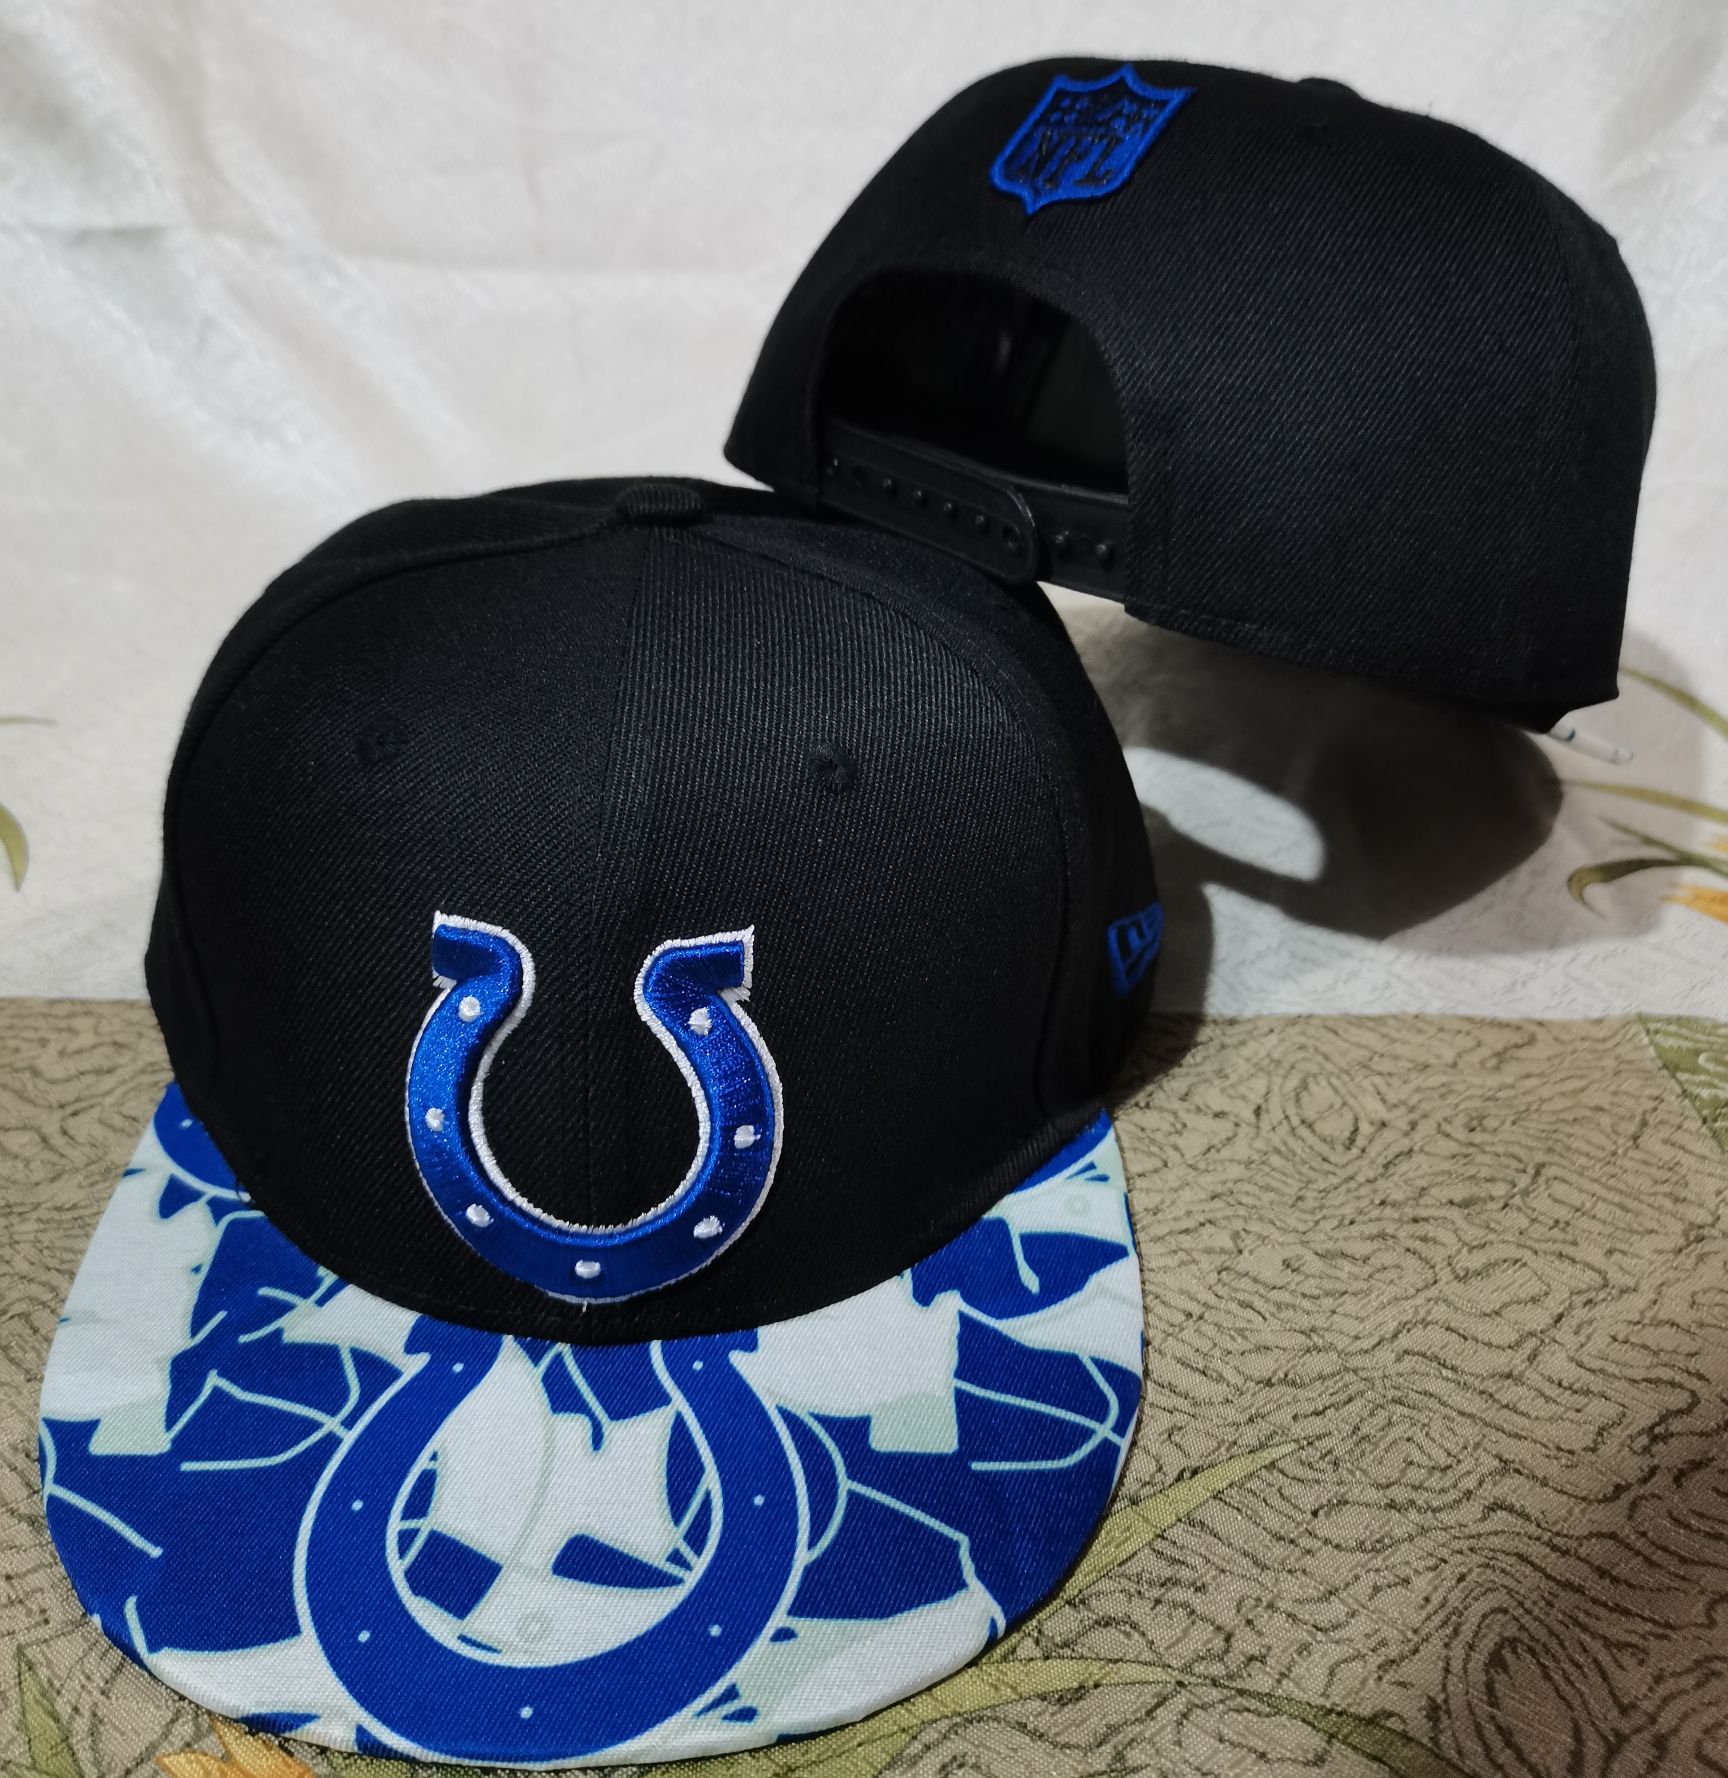 2022 NFL Indianapolis Colts hat GSMY->nfl hats->Sports Caps